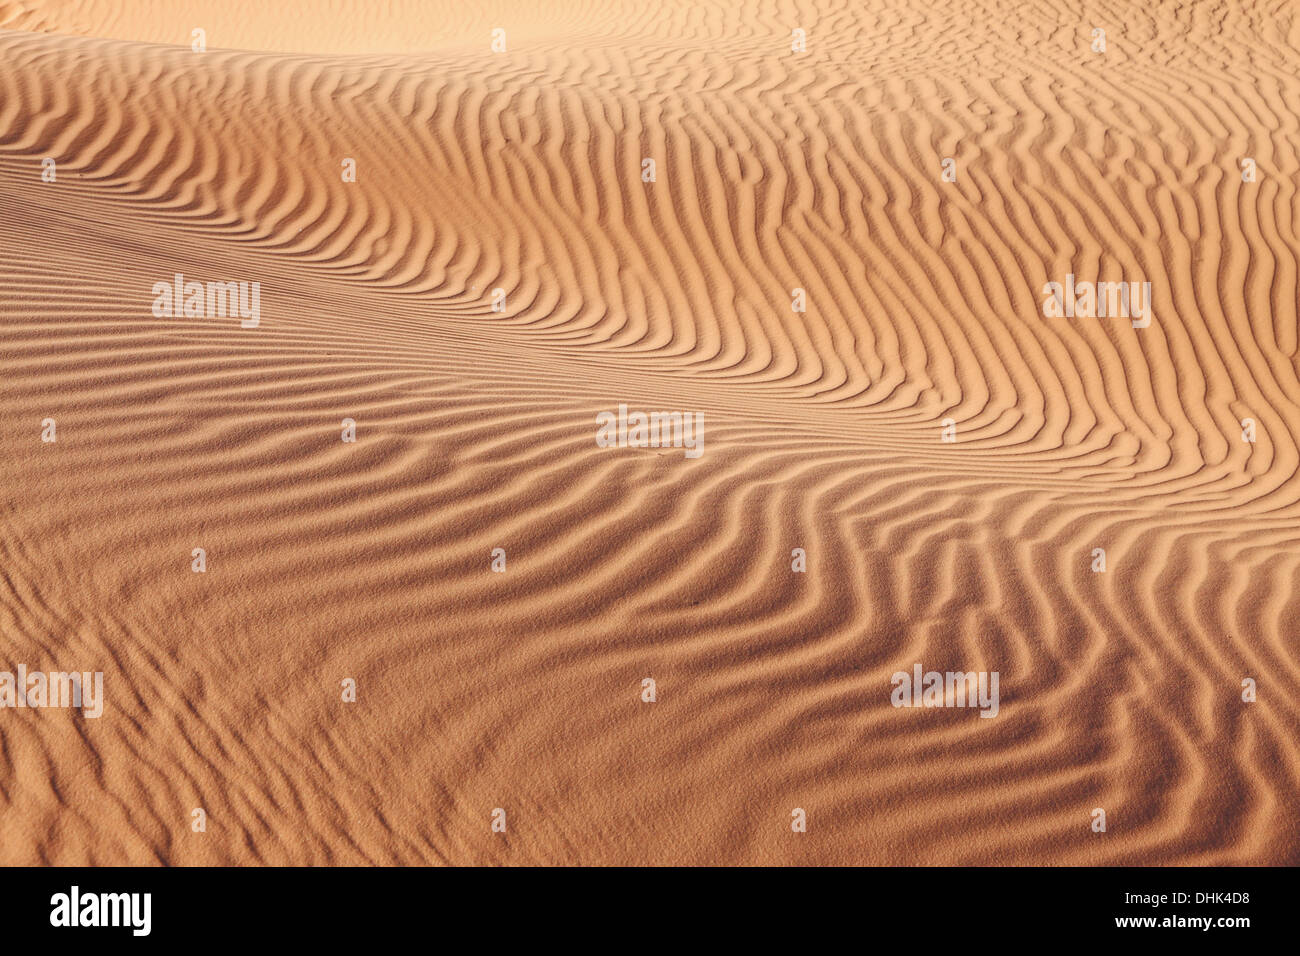 Intricate curves of sand waves Stock Photo